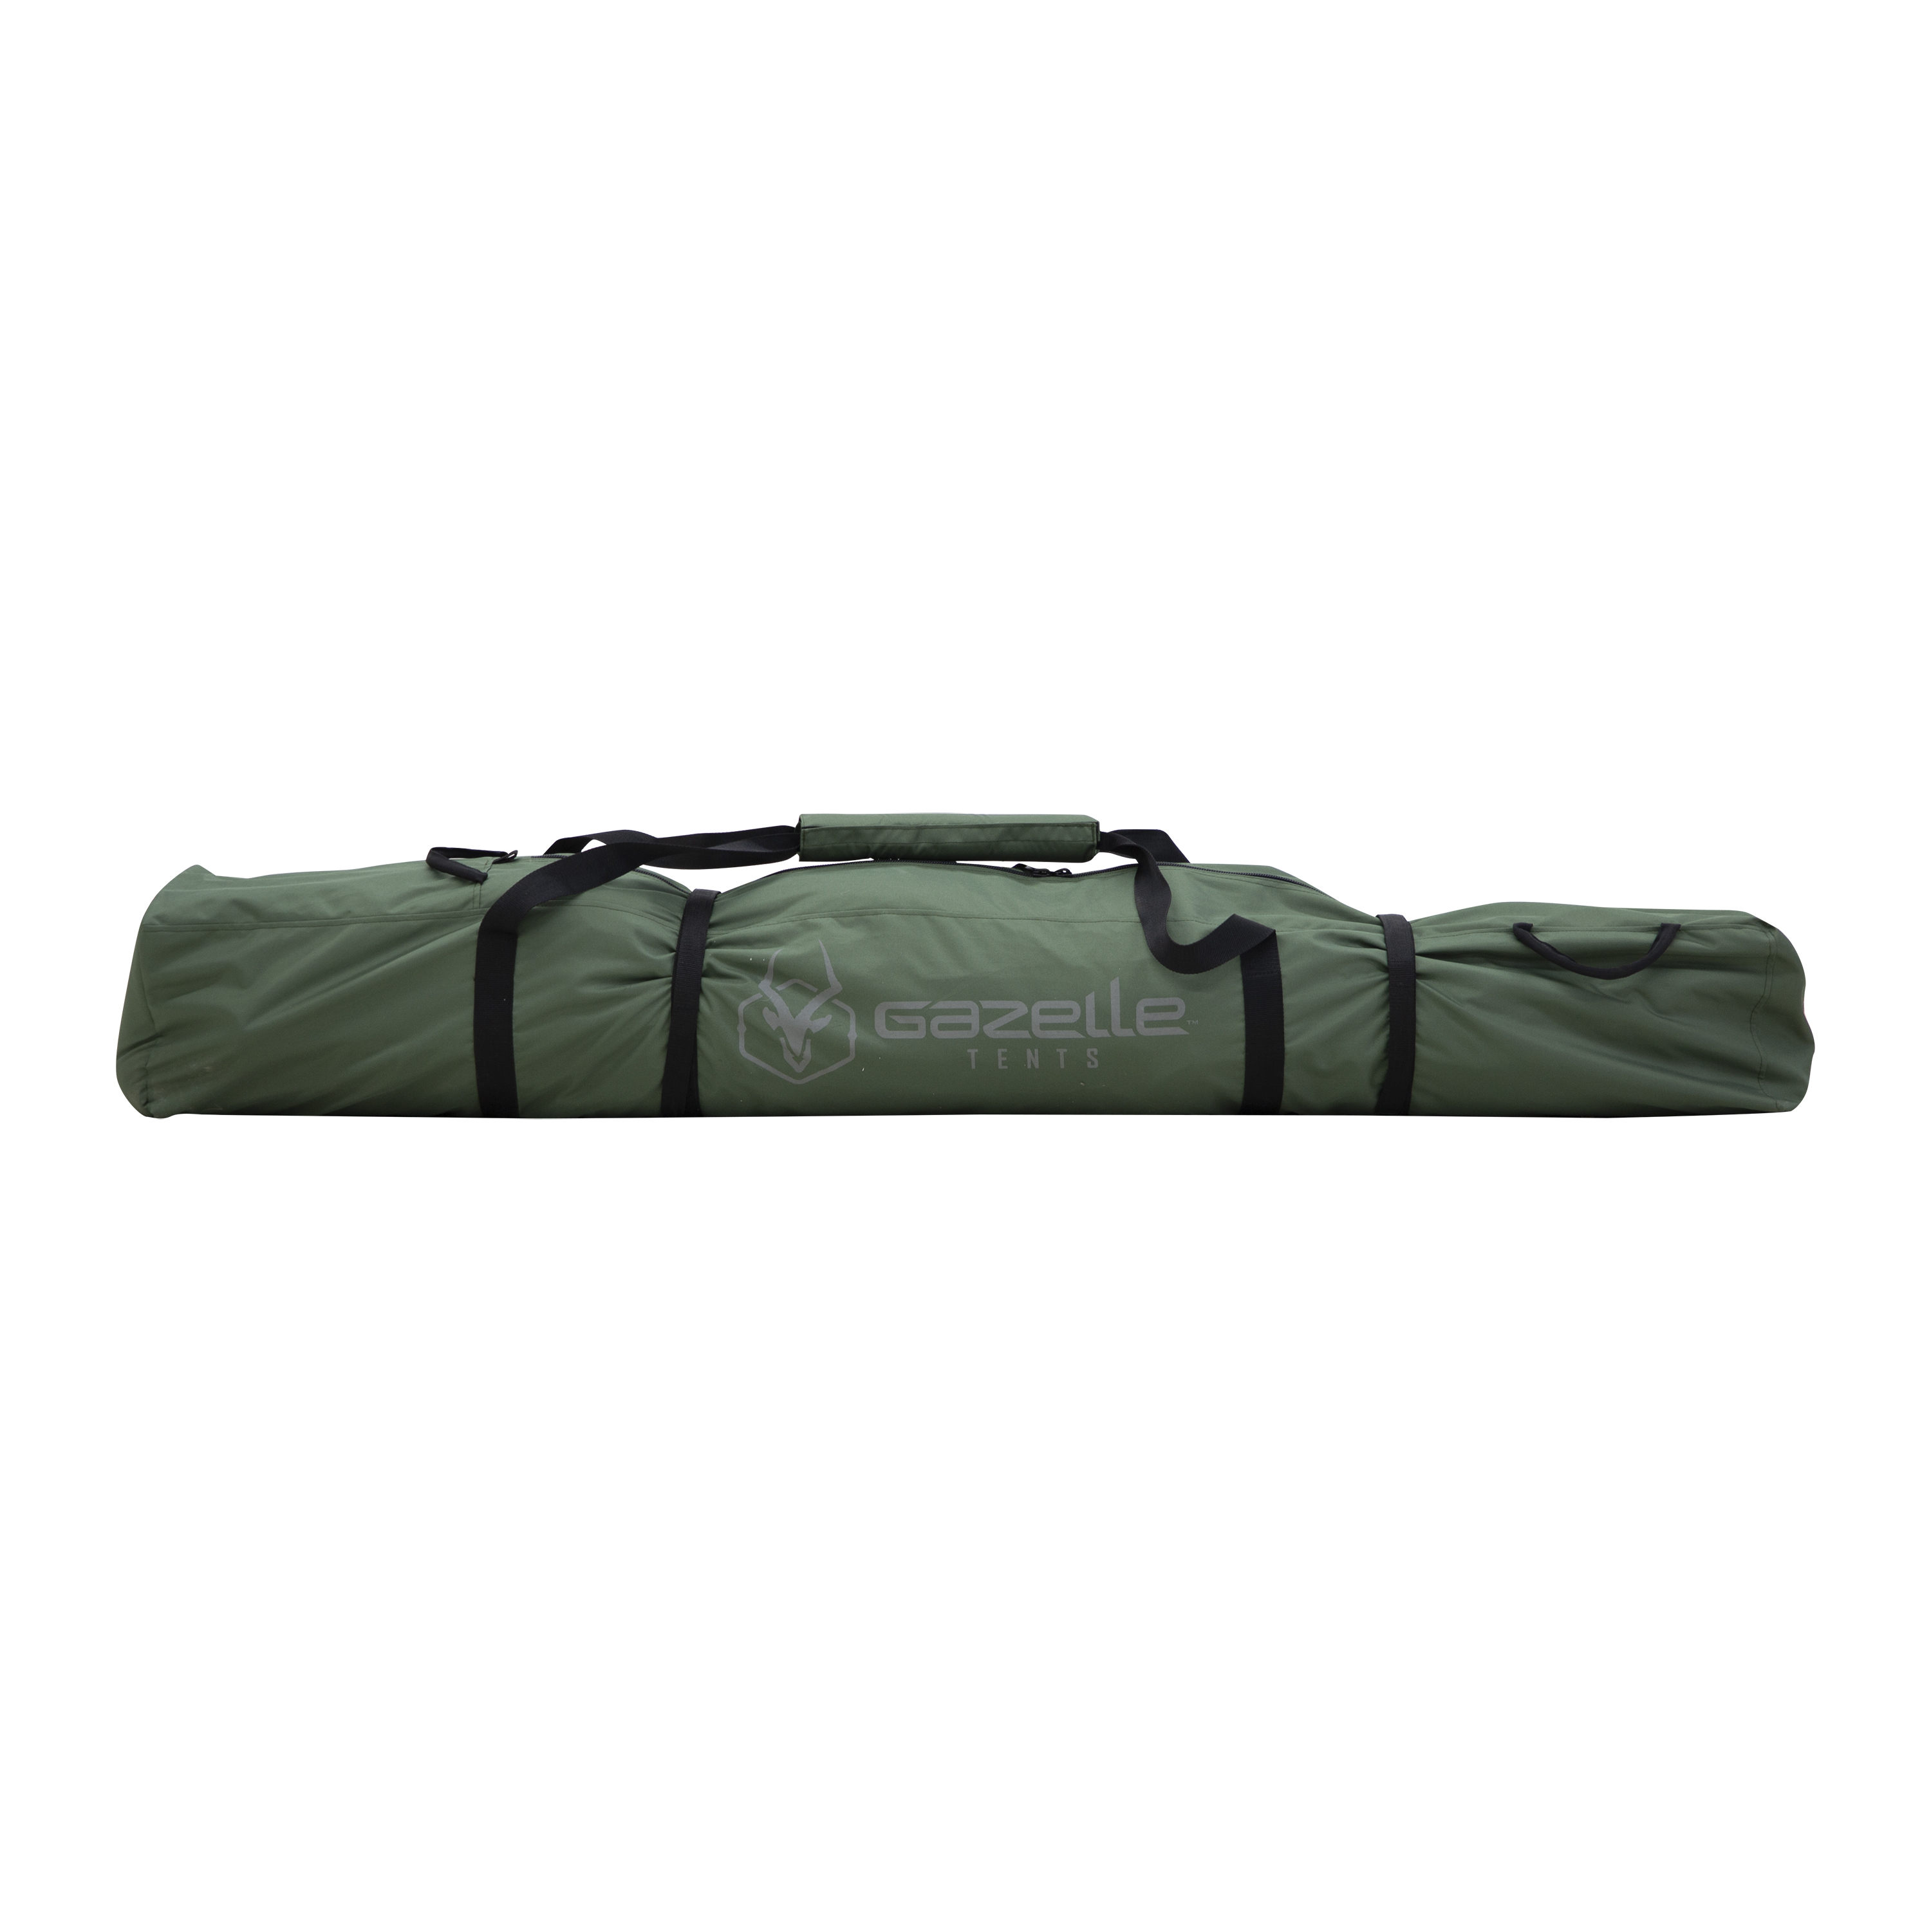 Gazelle Tents™ T4 Portable Hub Tent, 4-Person, Alpine Green, GT400GR - image 3 of 12